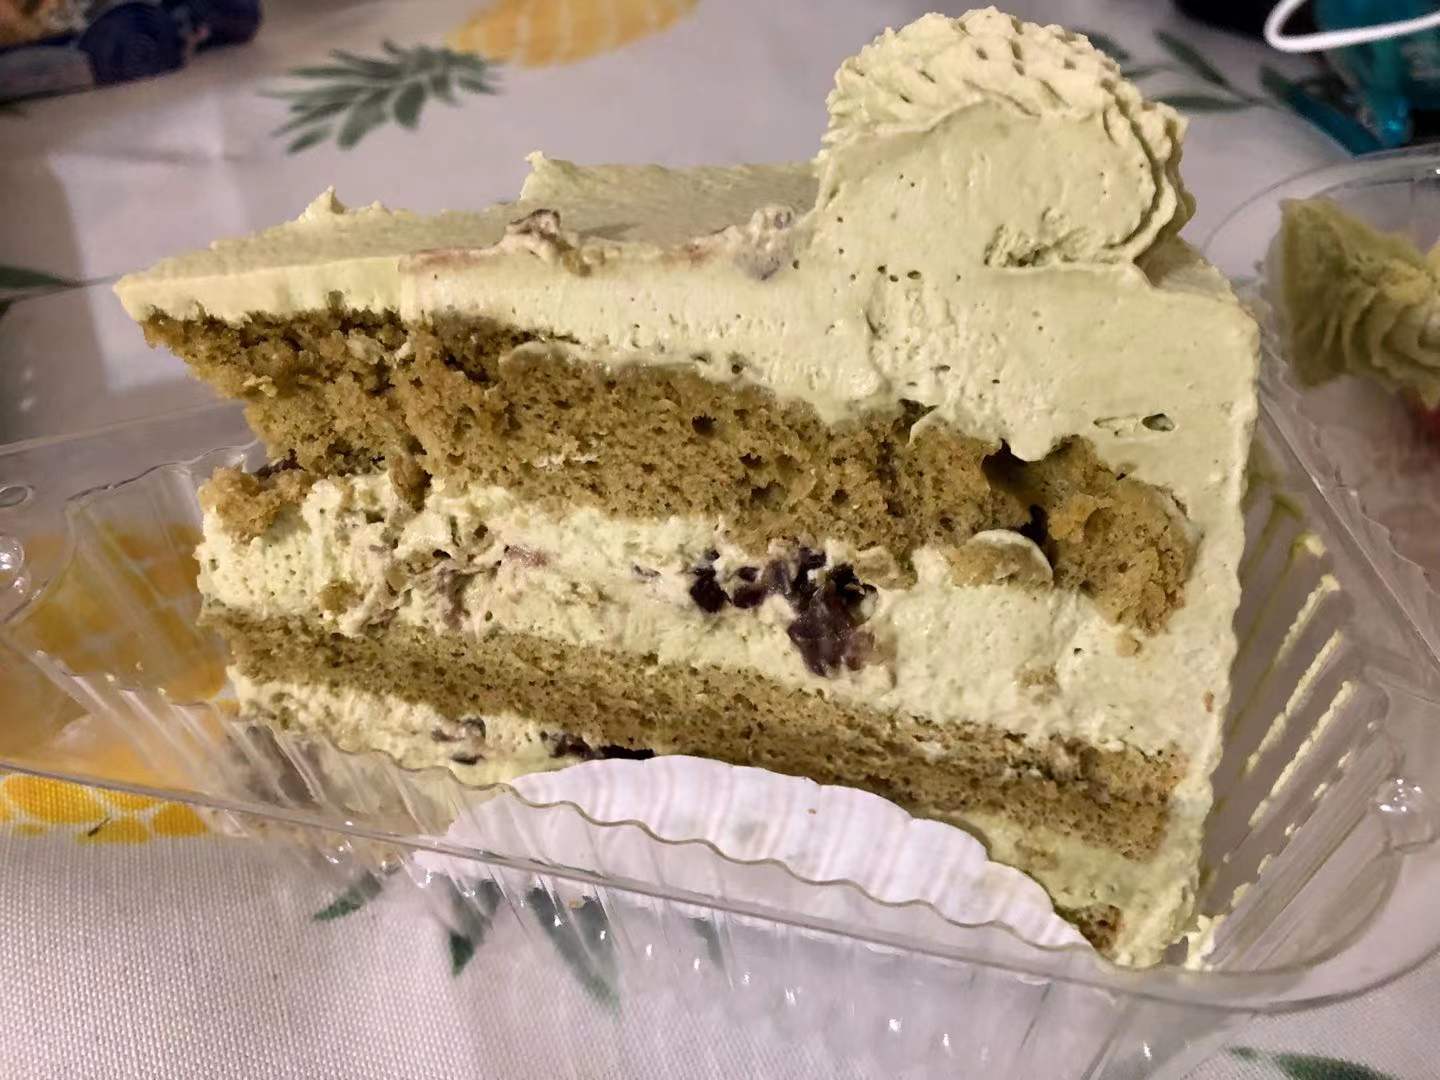 In a plastic to go pie dish, there is a red bean matcha cake. Photo by Xiaohui Zhang.